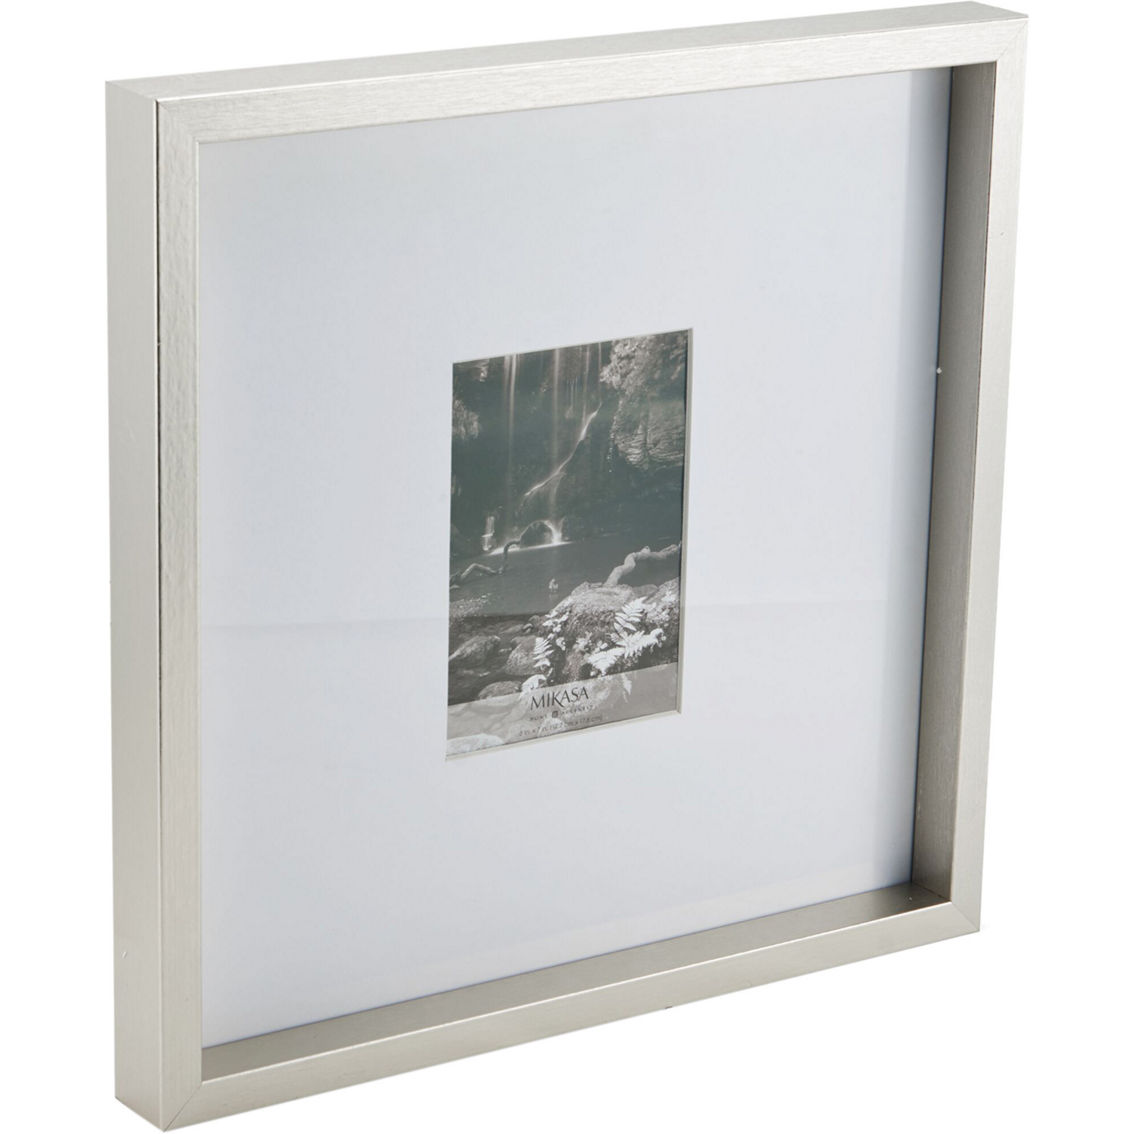 Mikasa Silver Gallery 16 x 16 in. Frame Matted to 5 x 7 in. - Image 2 of 4